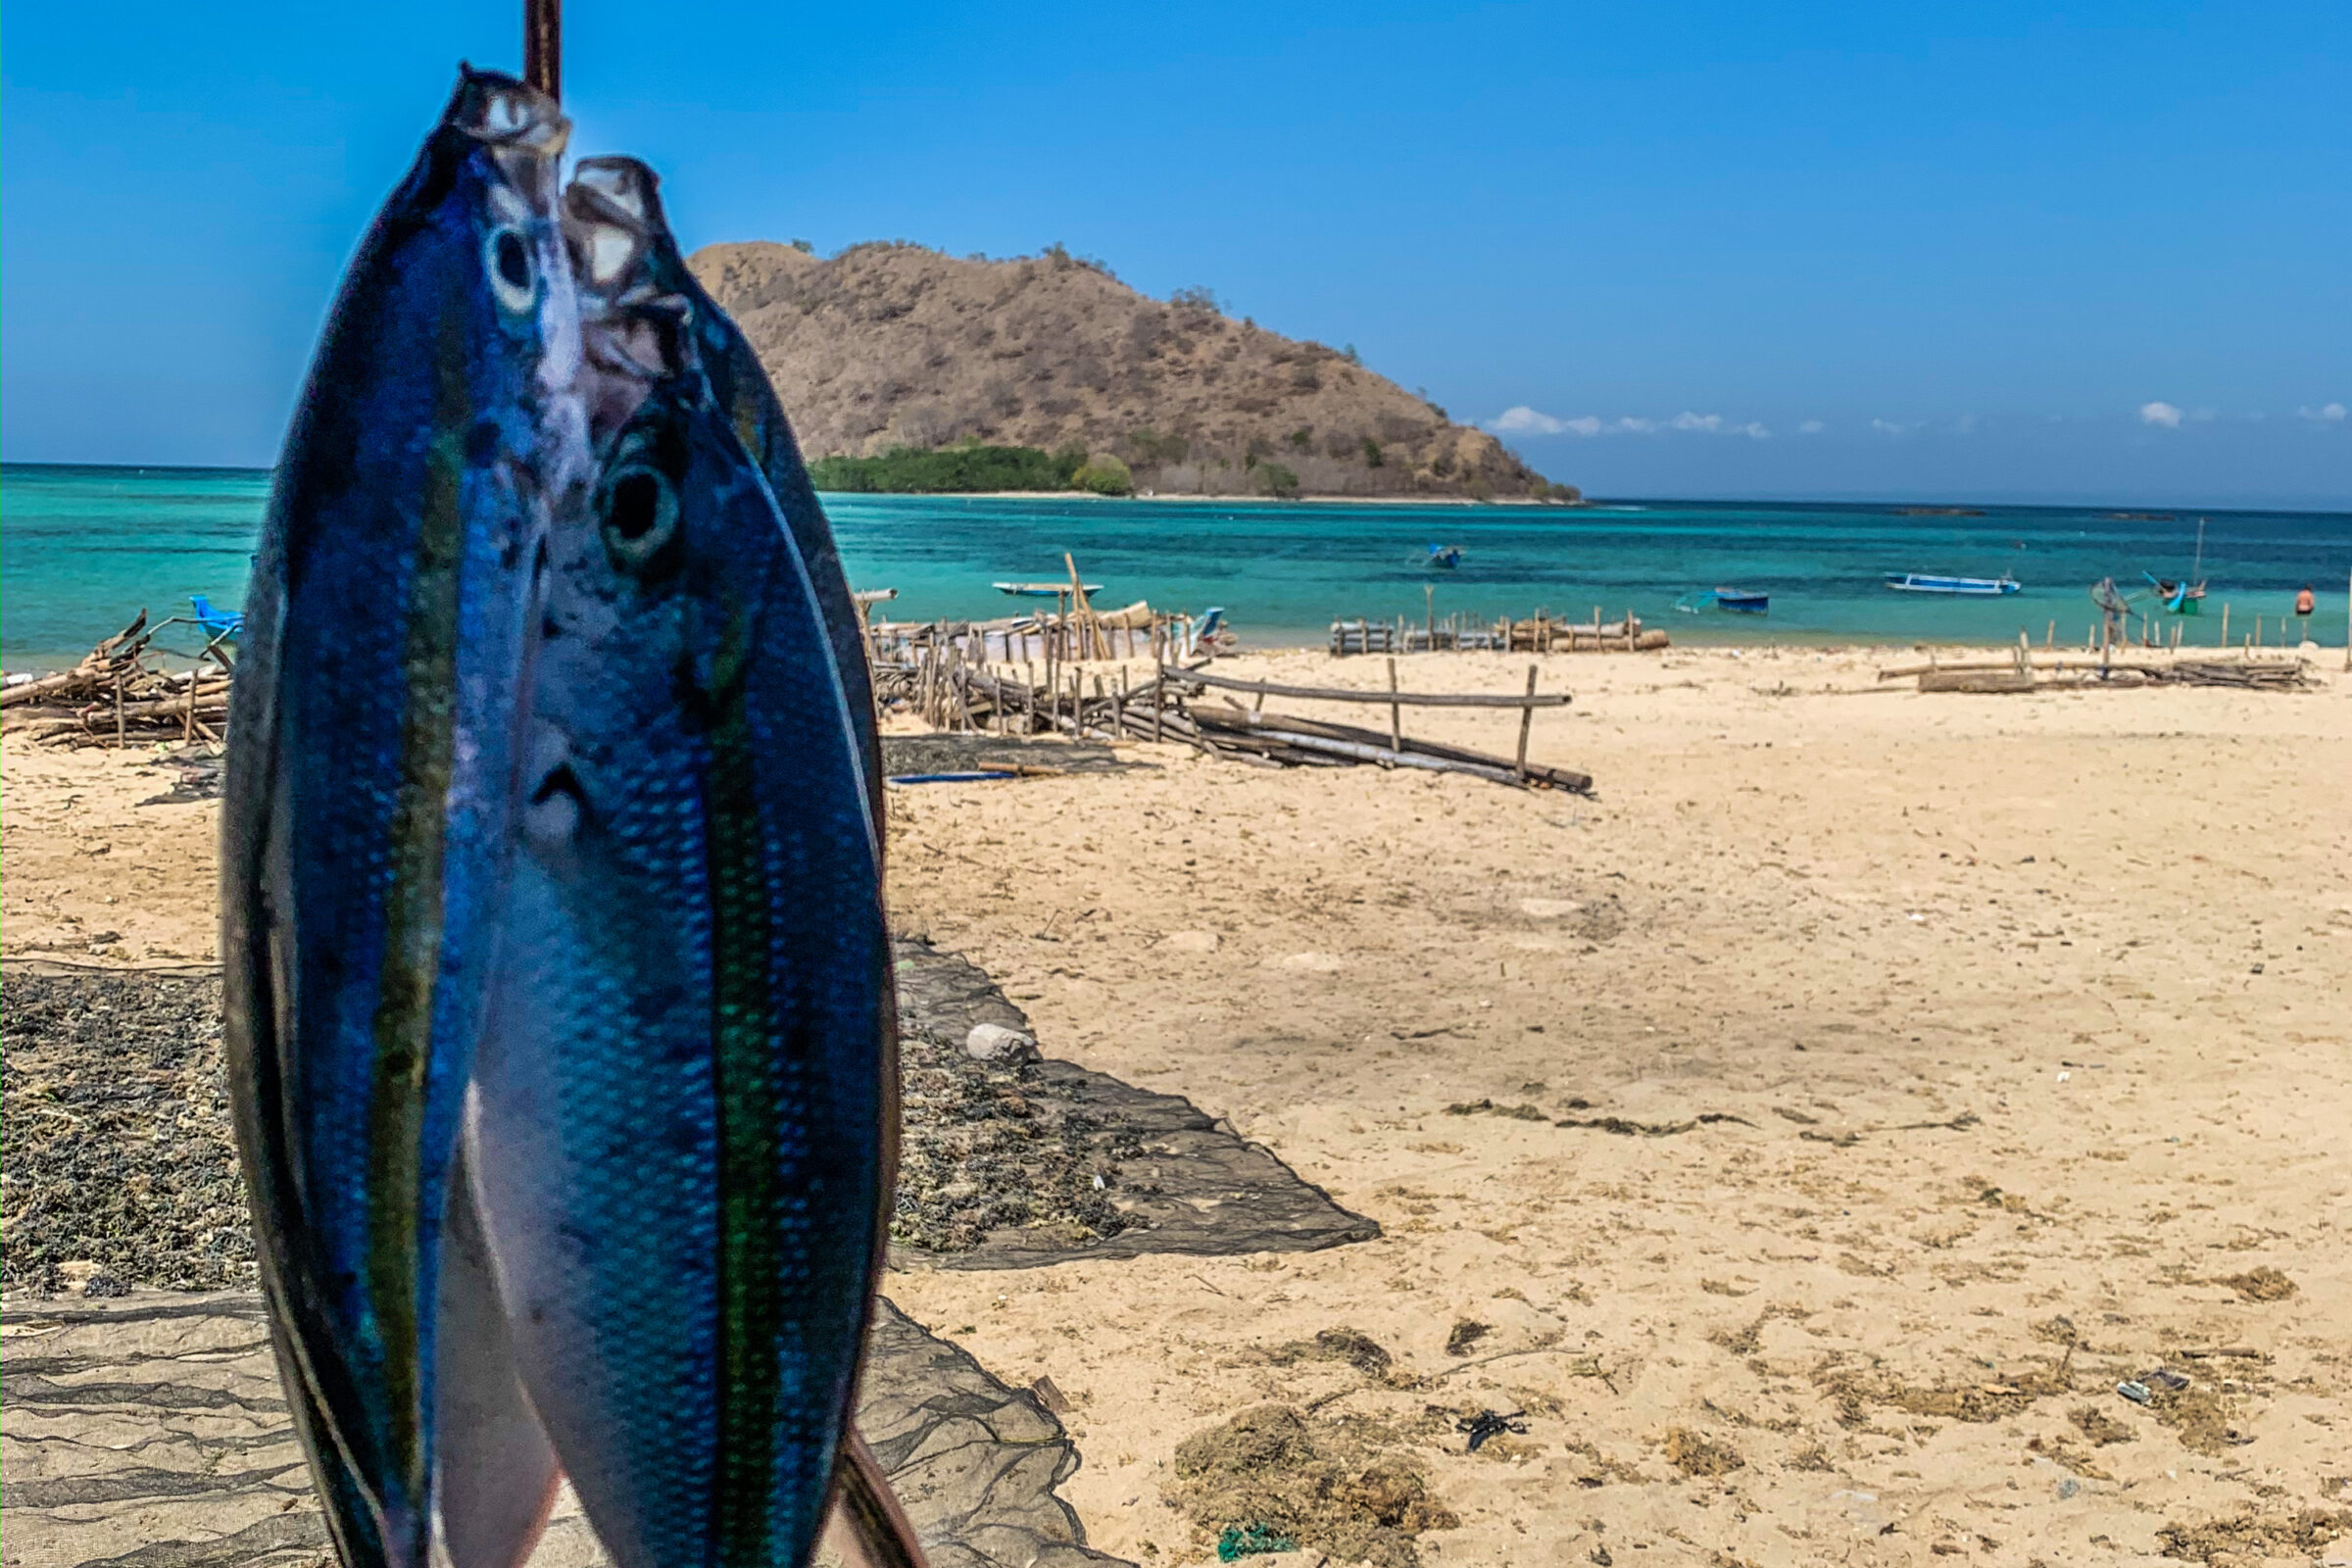 Fresh fish with beautiful colors with an amazing sandy beach in the background